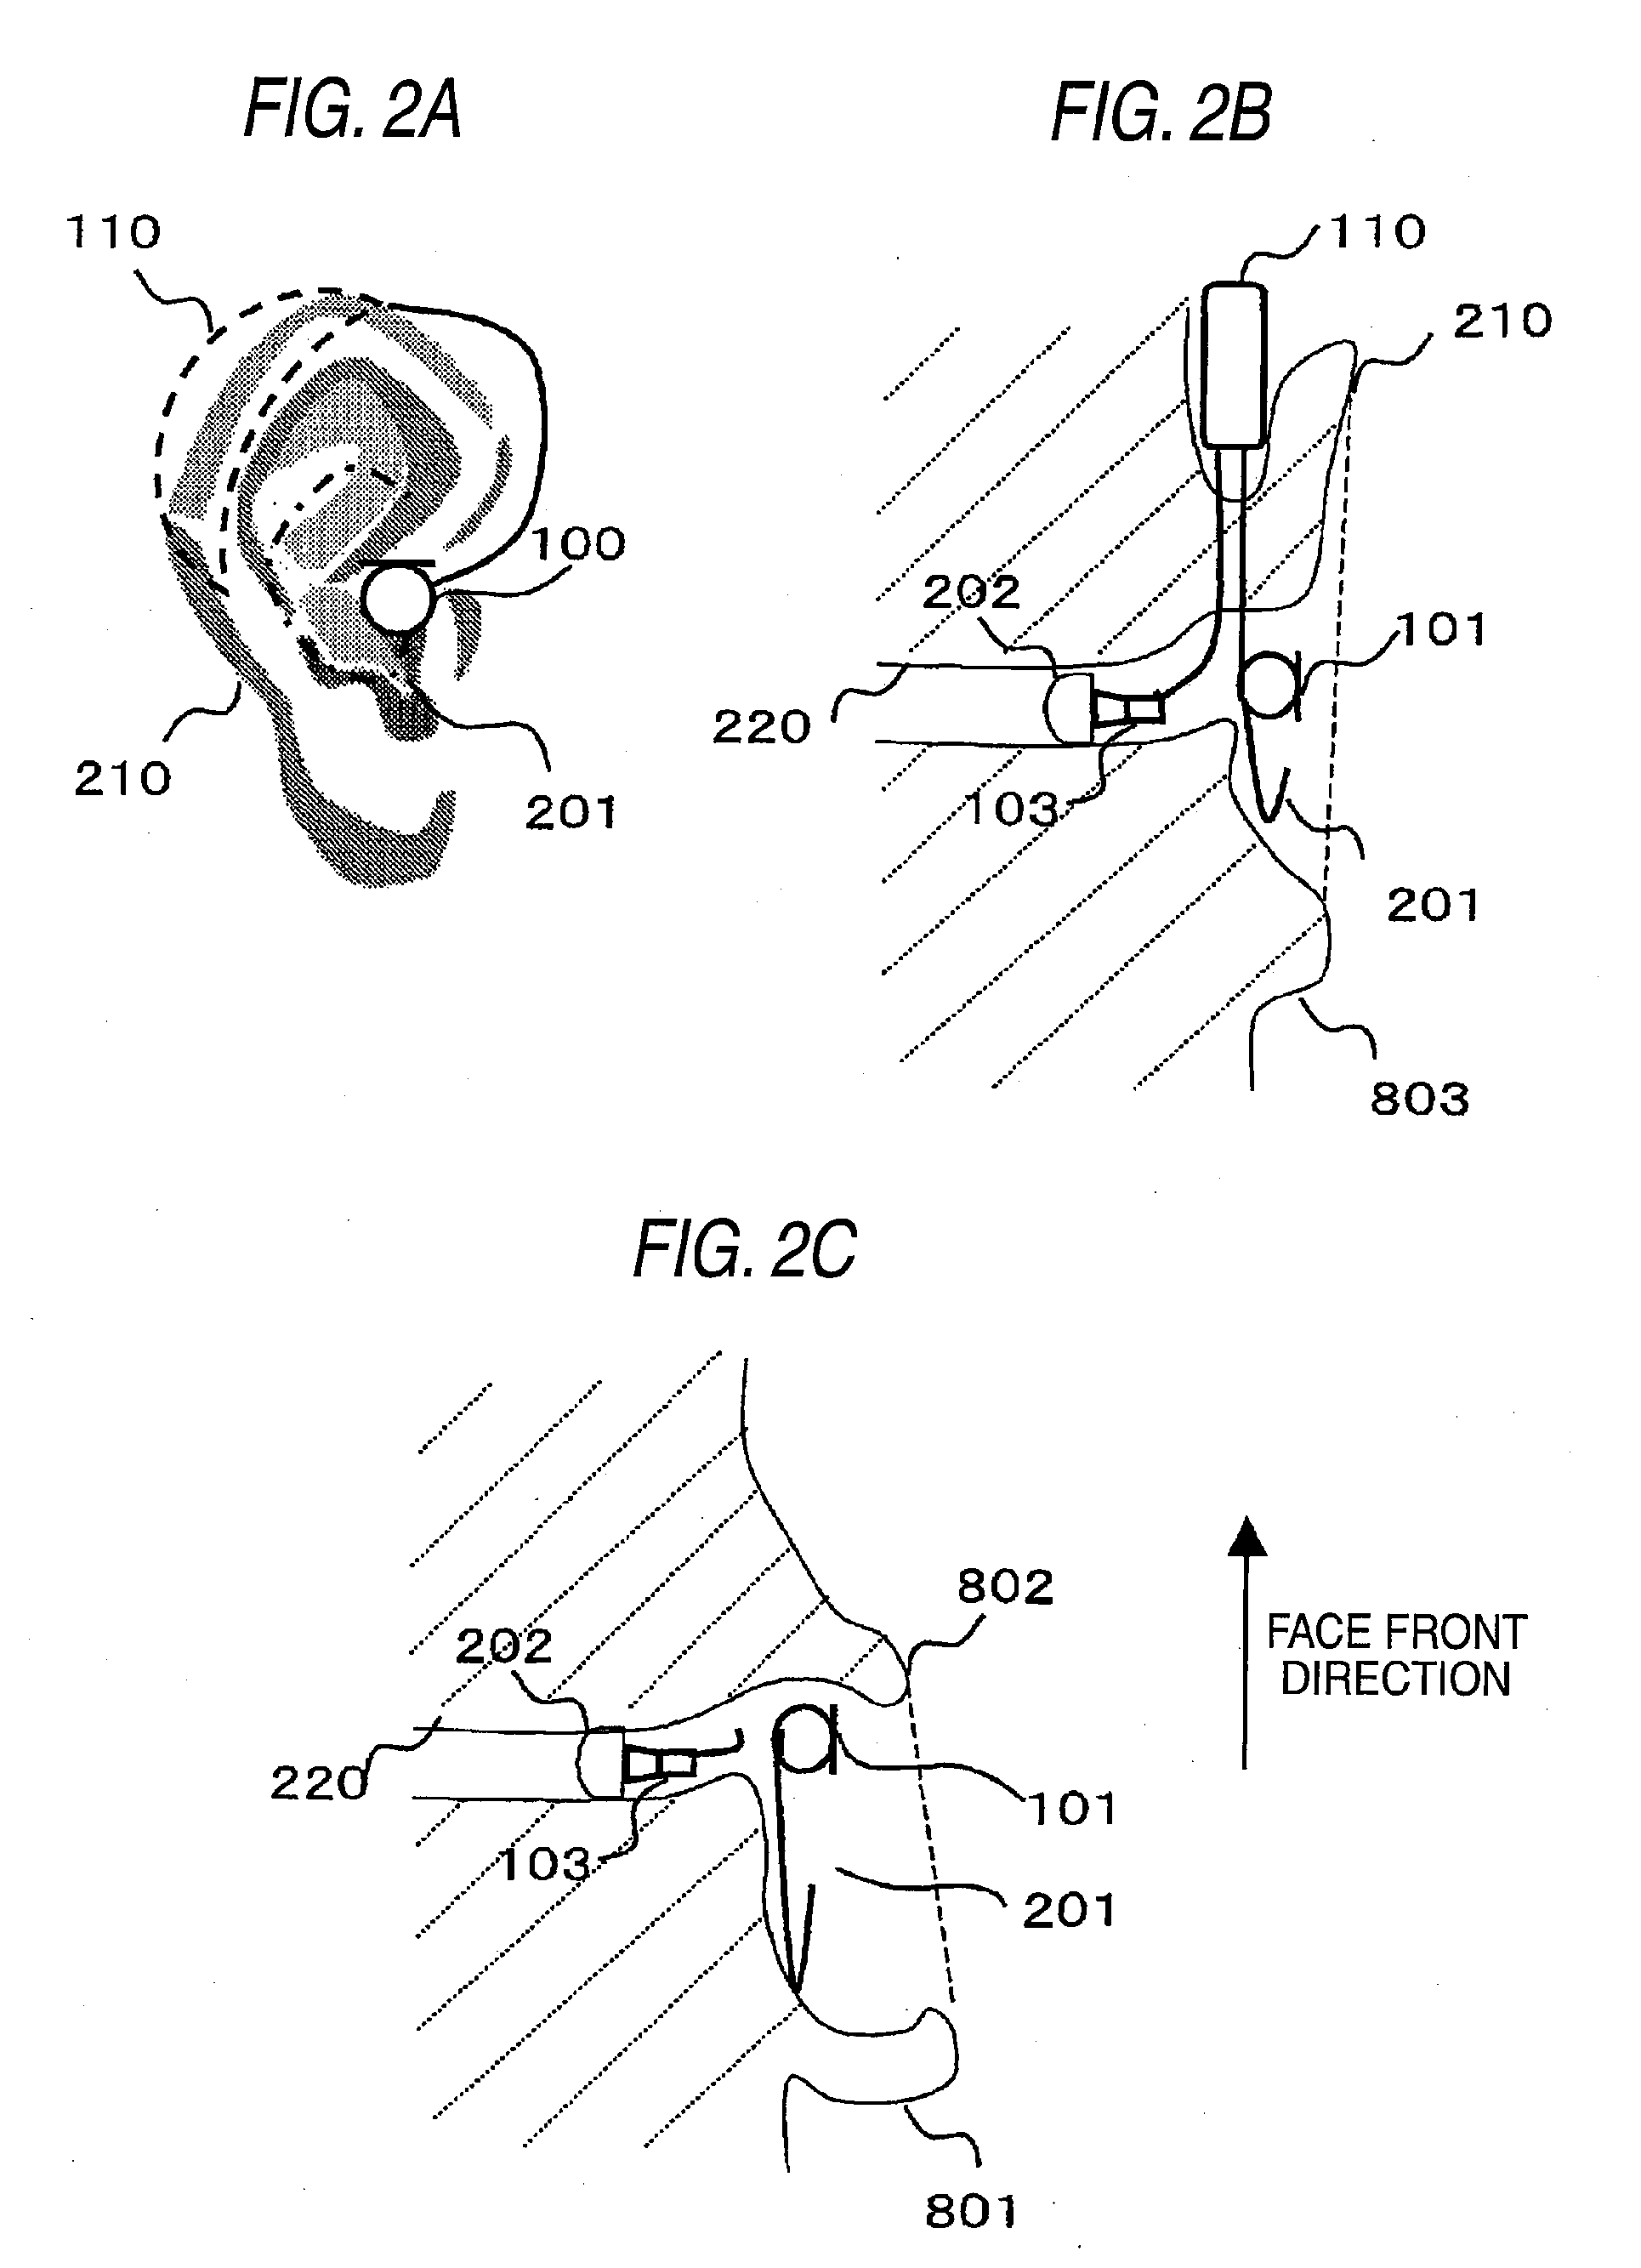 Behind-the-ear hearing aid whose microphone is set in an entrance of ear canal